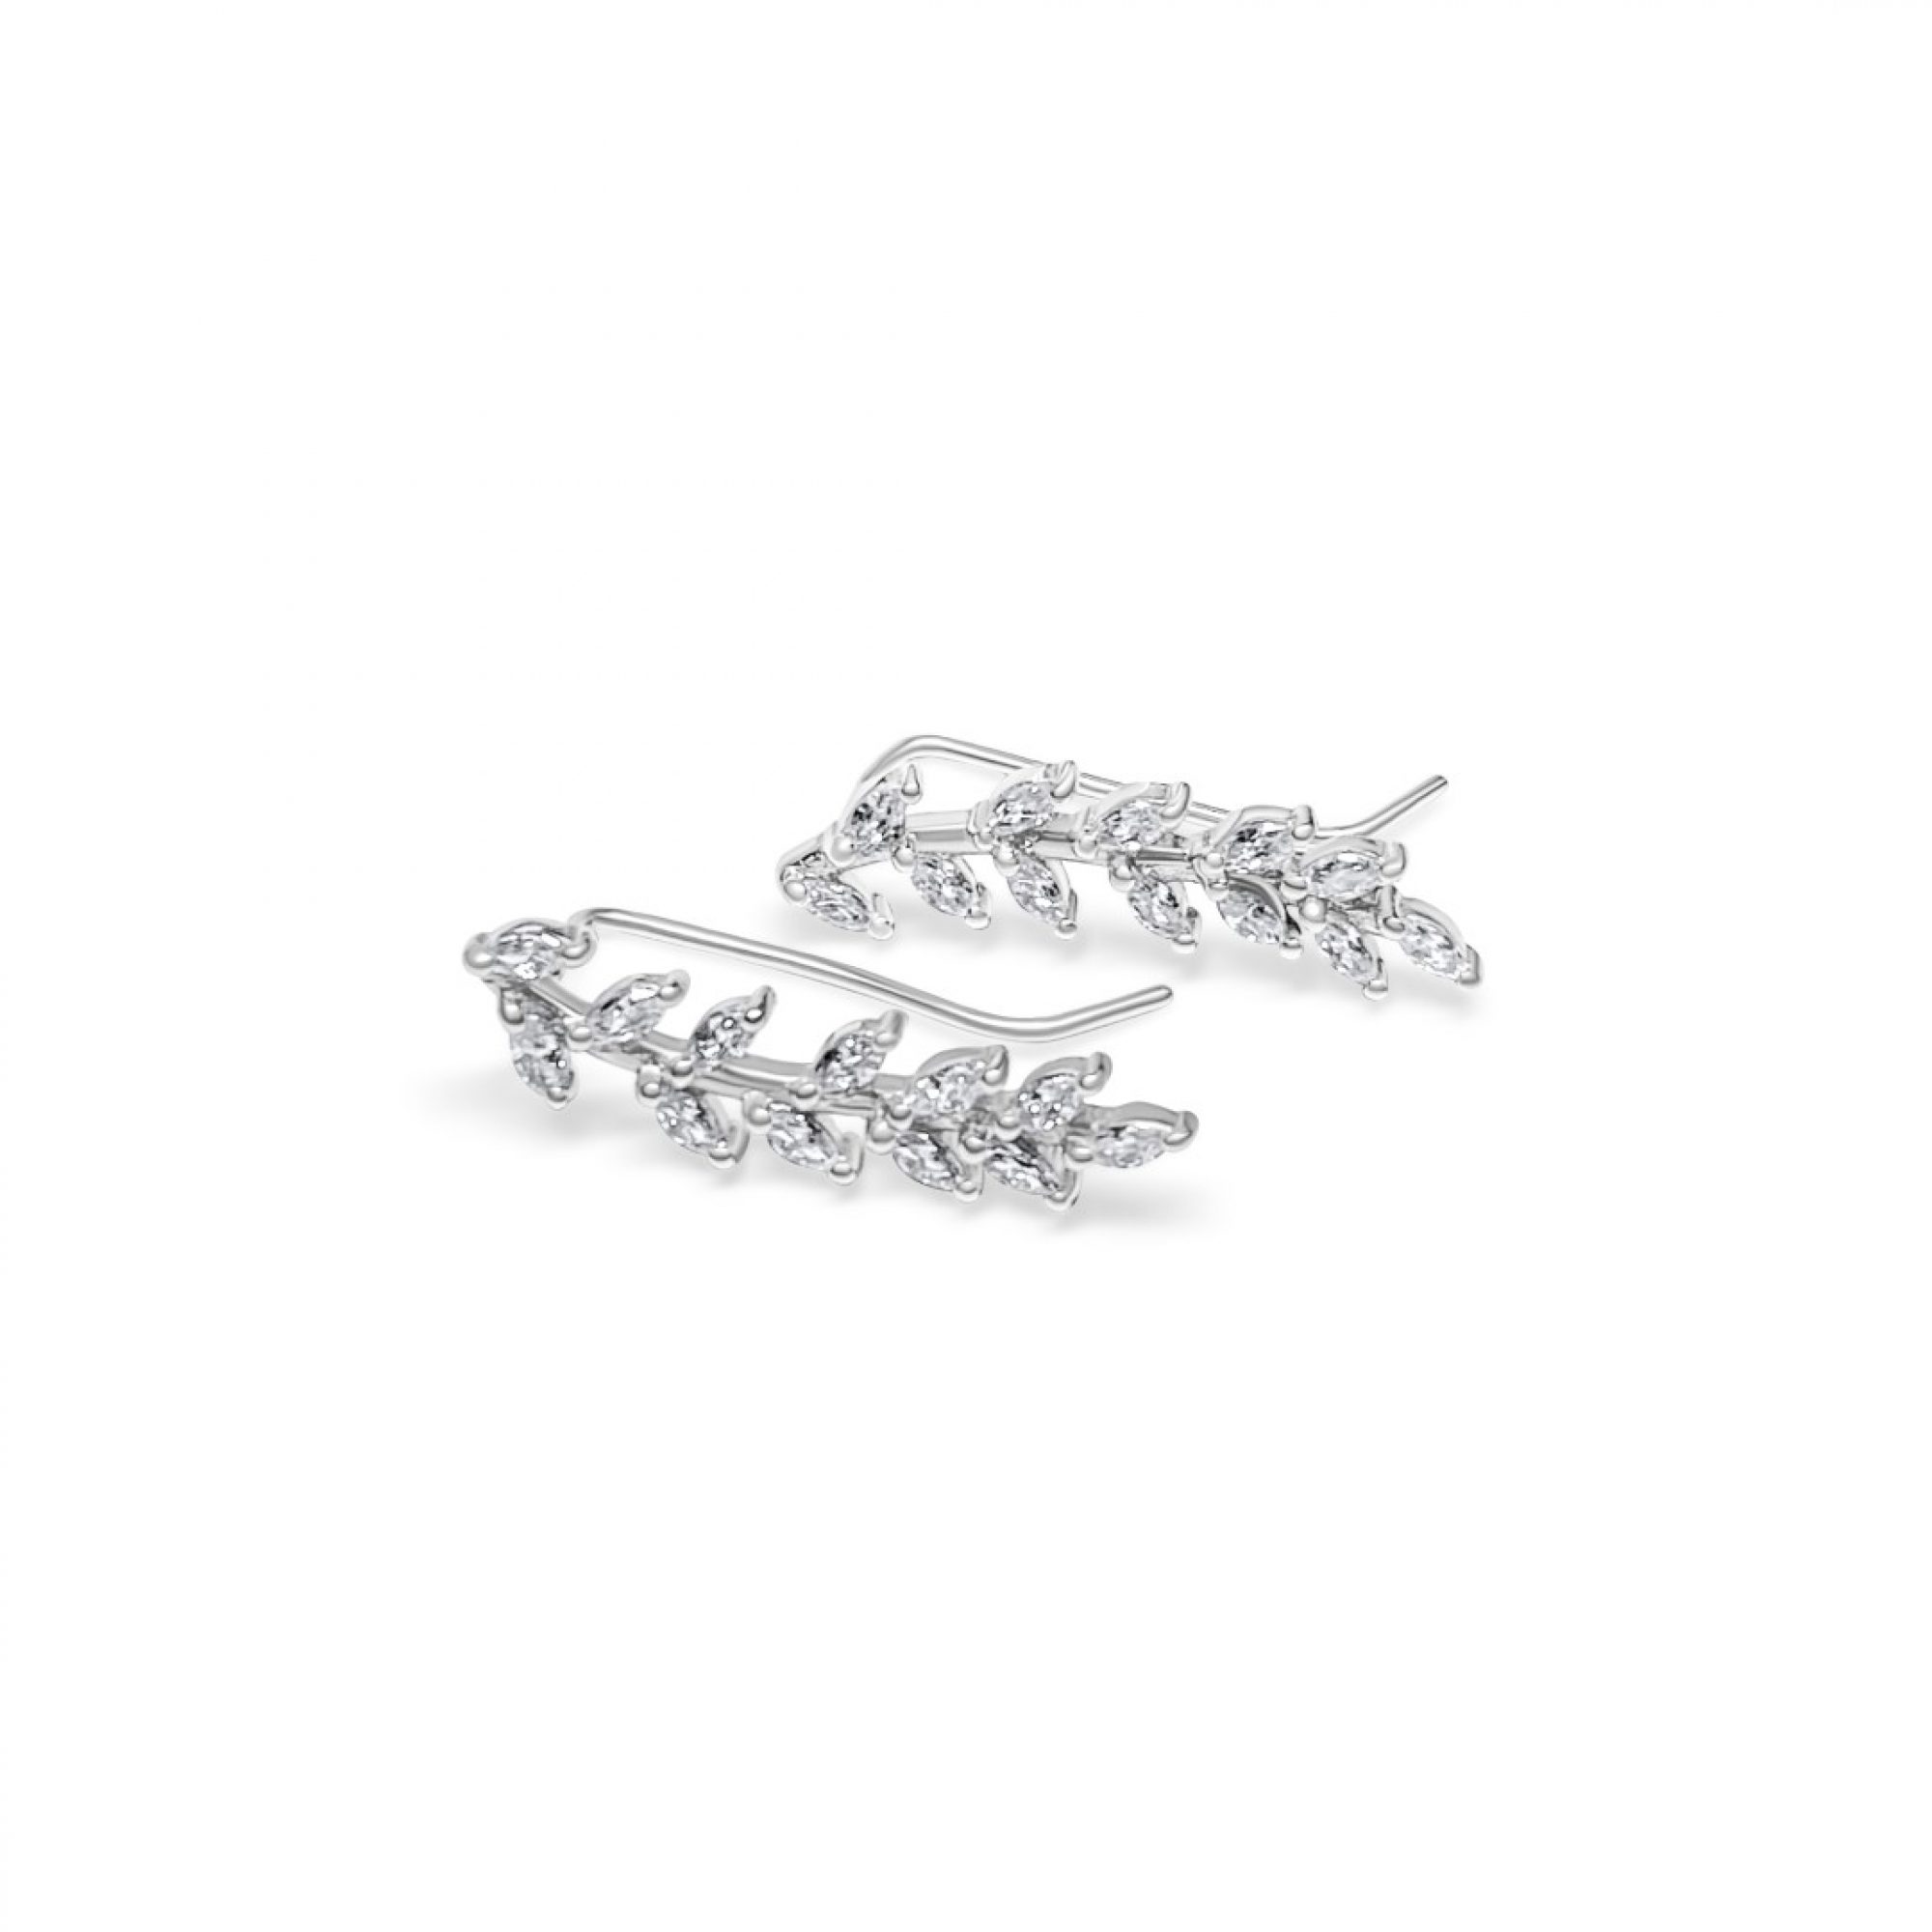 Olive branch ear climbers with zircon stones